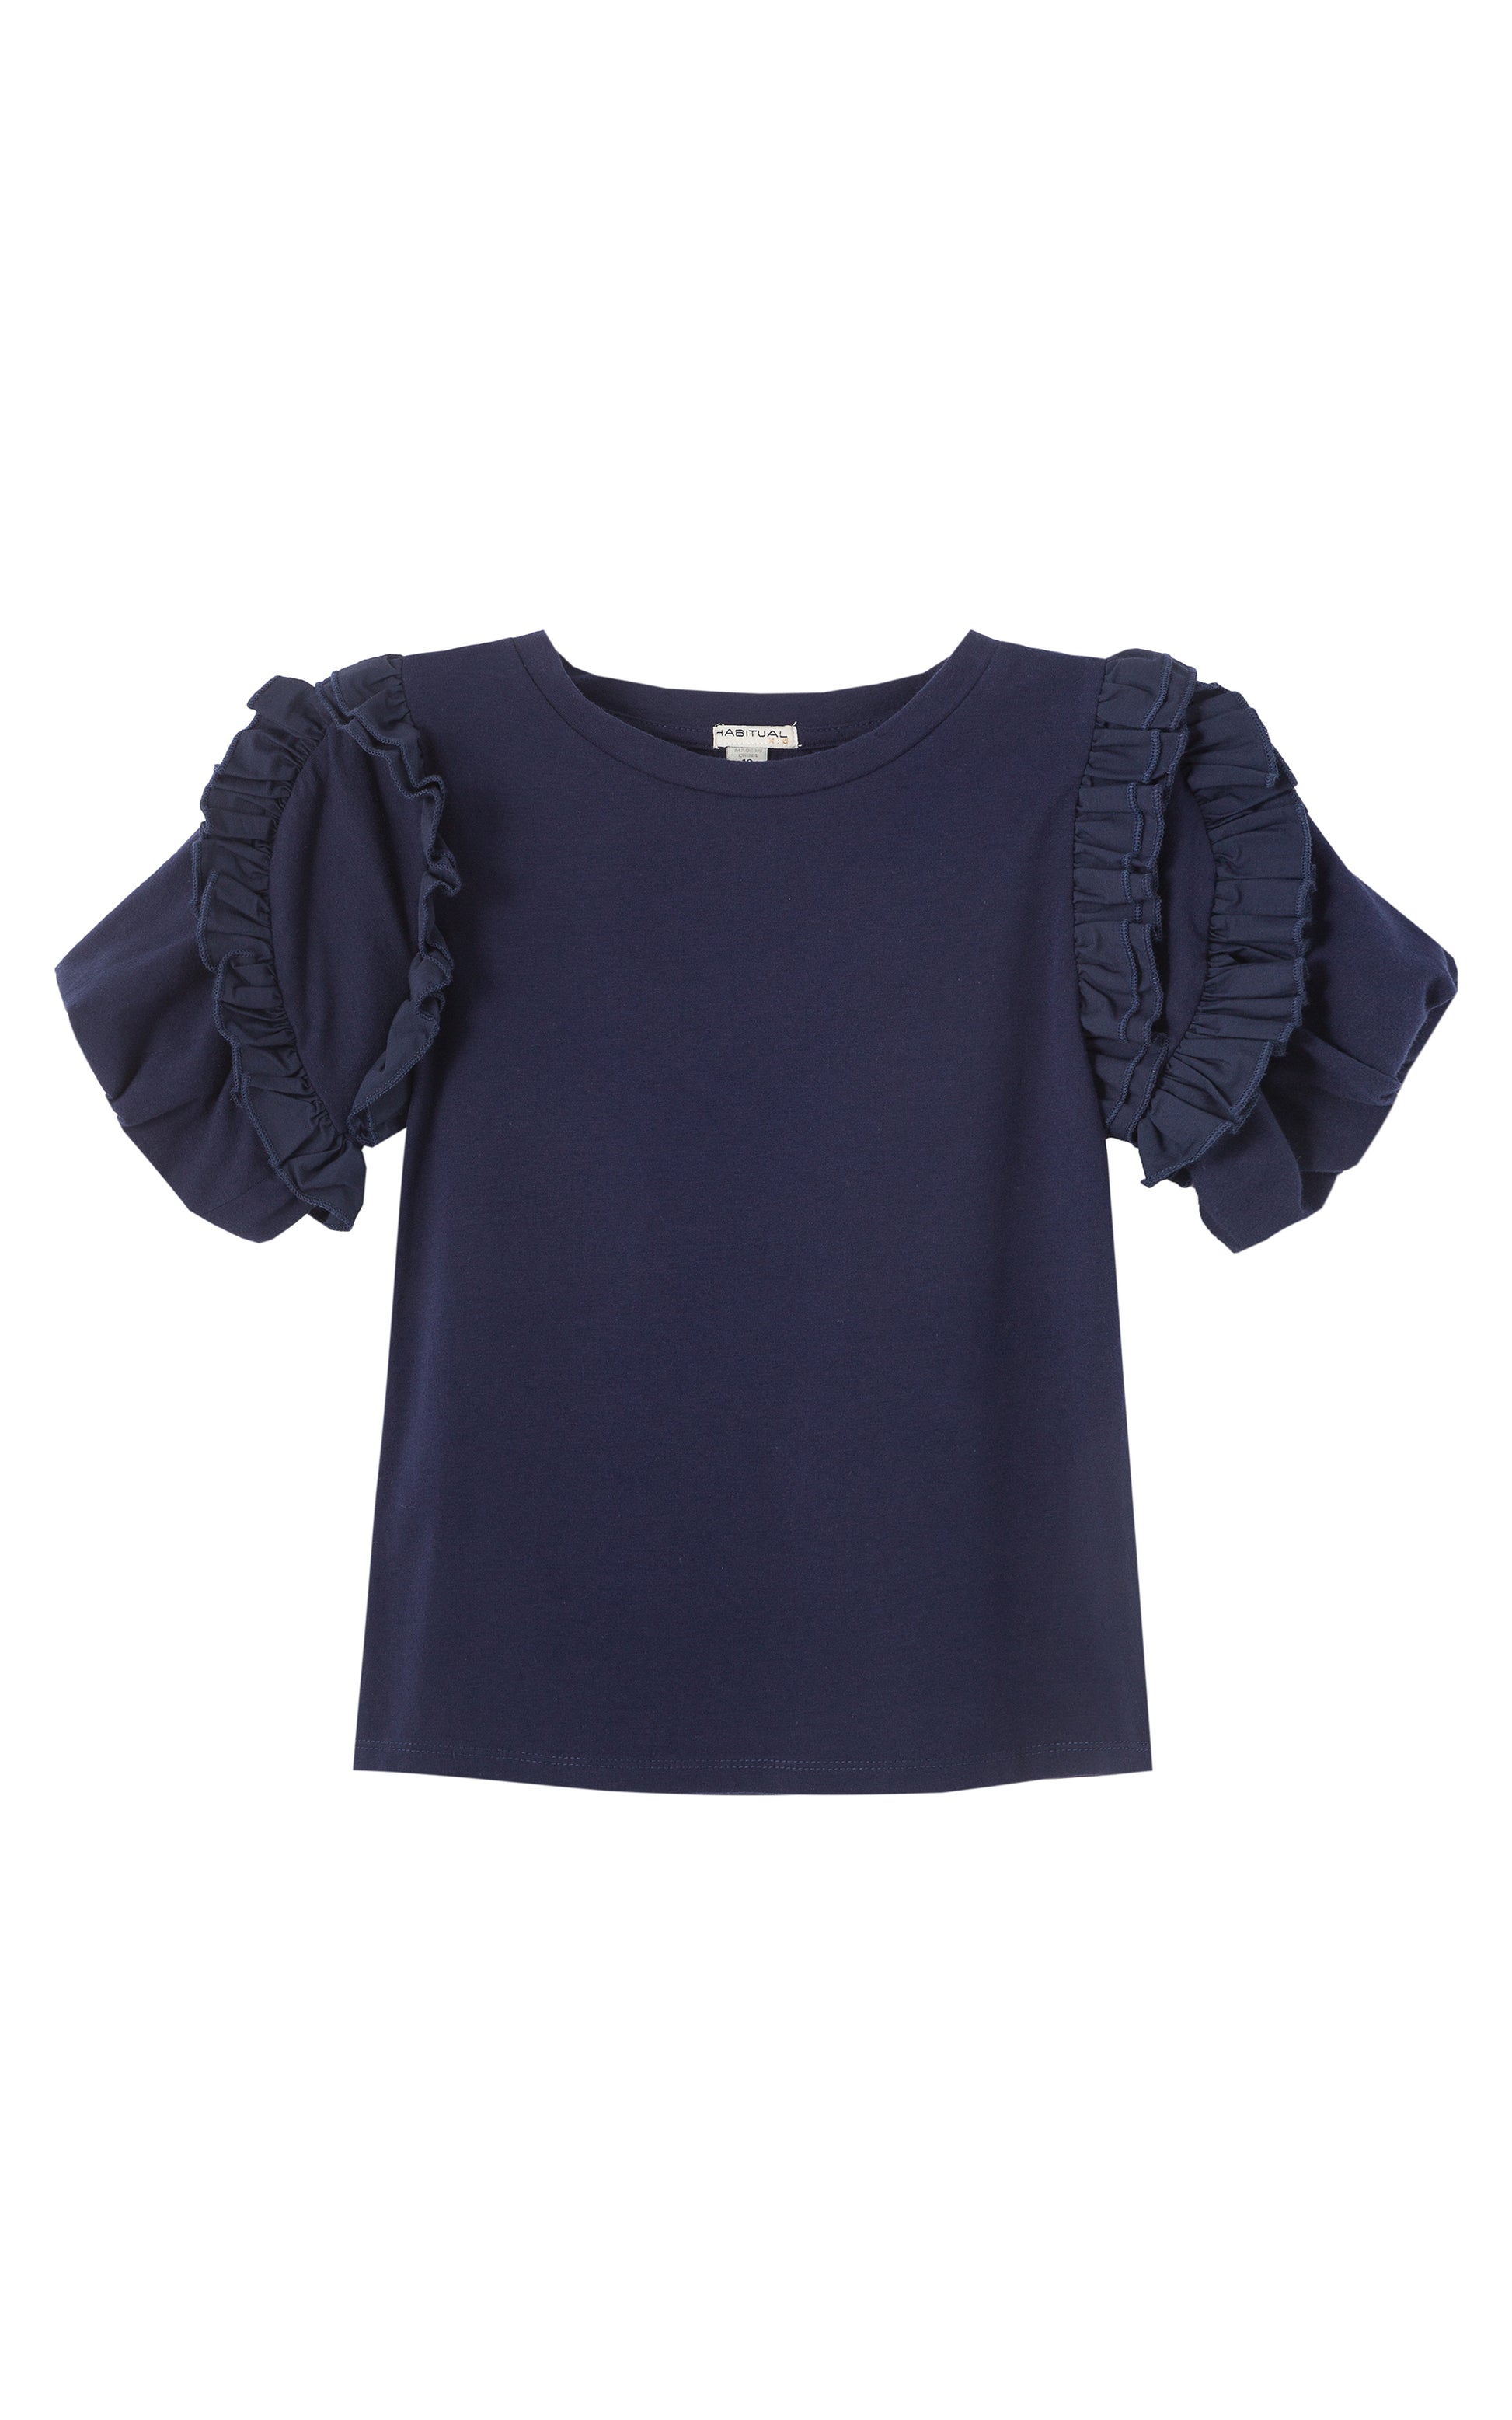 DARK BLUE T-SHIRT WITH PLEATED RUFFLED SLEEVES